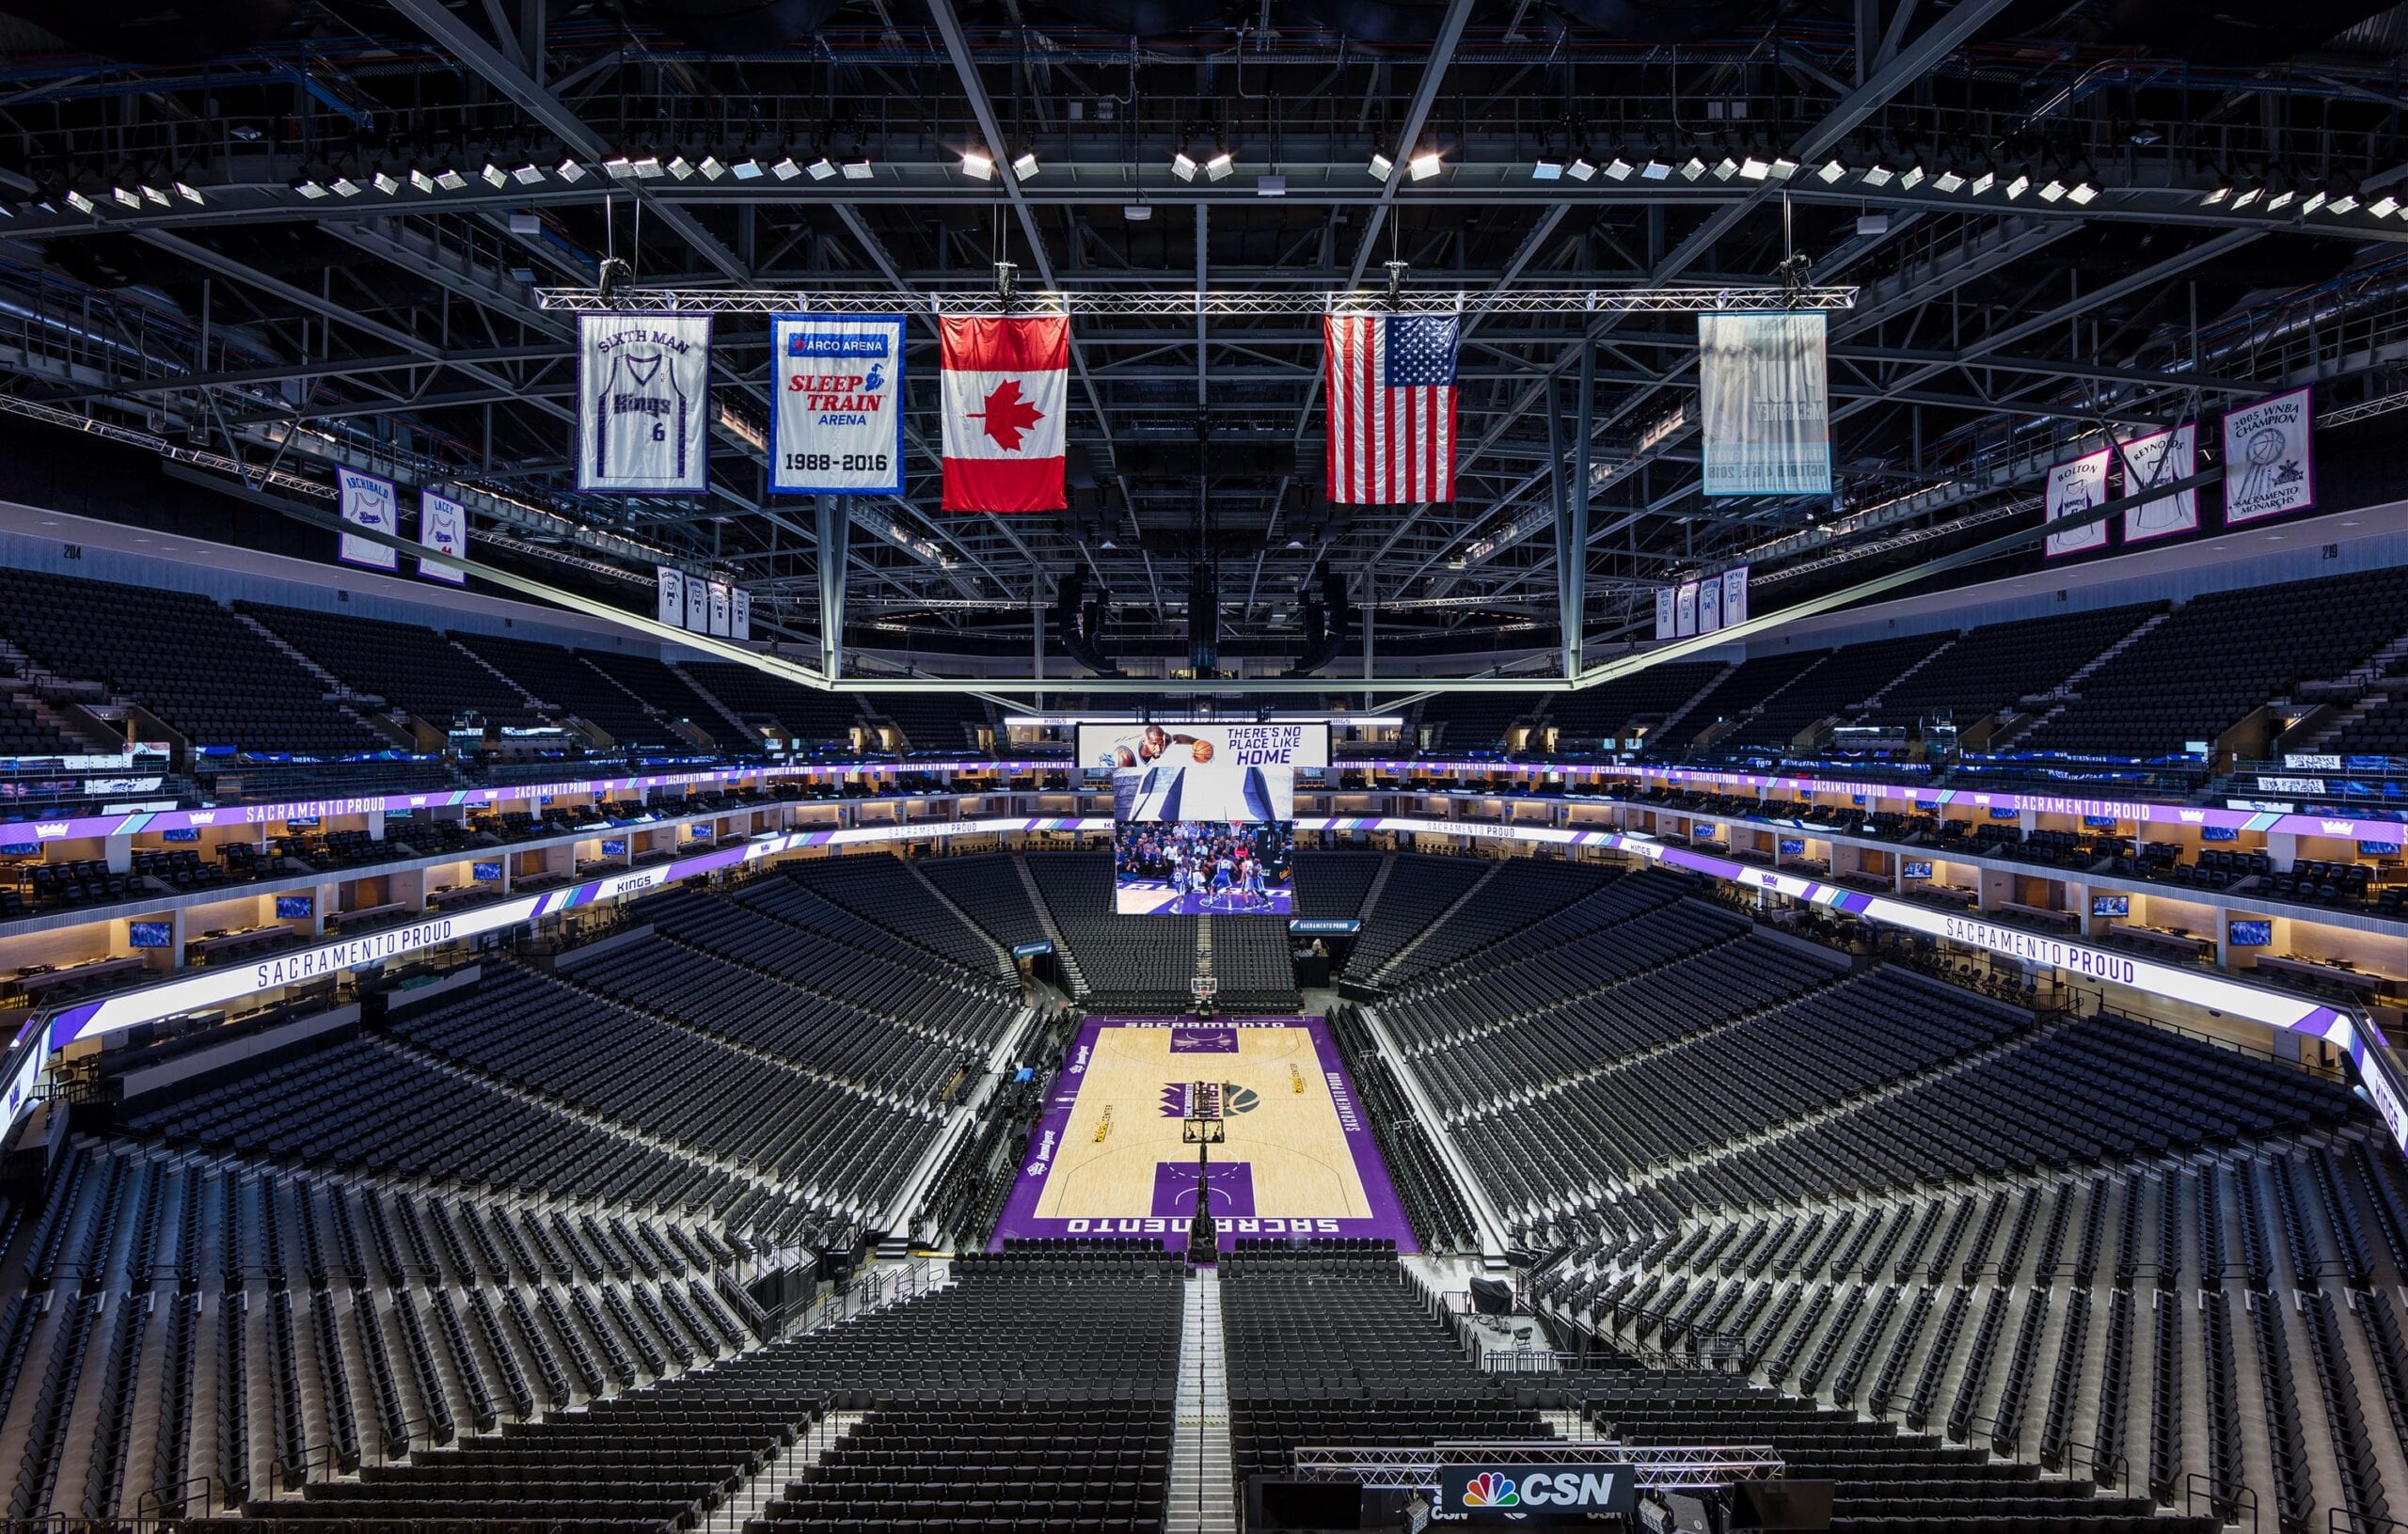 How well do you know the Golden 1 Center?